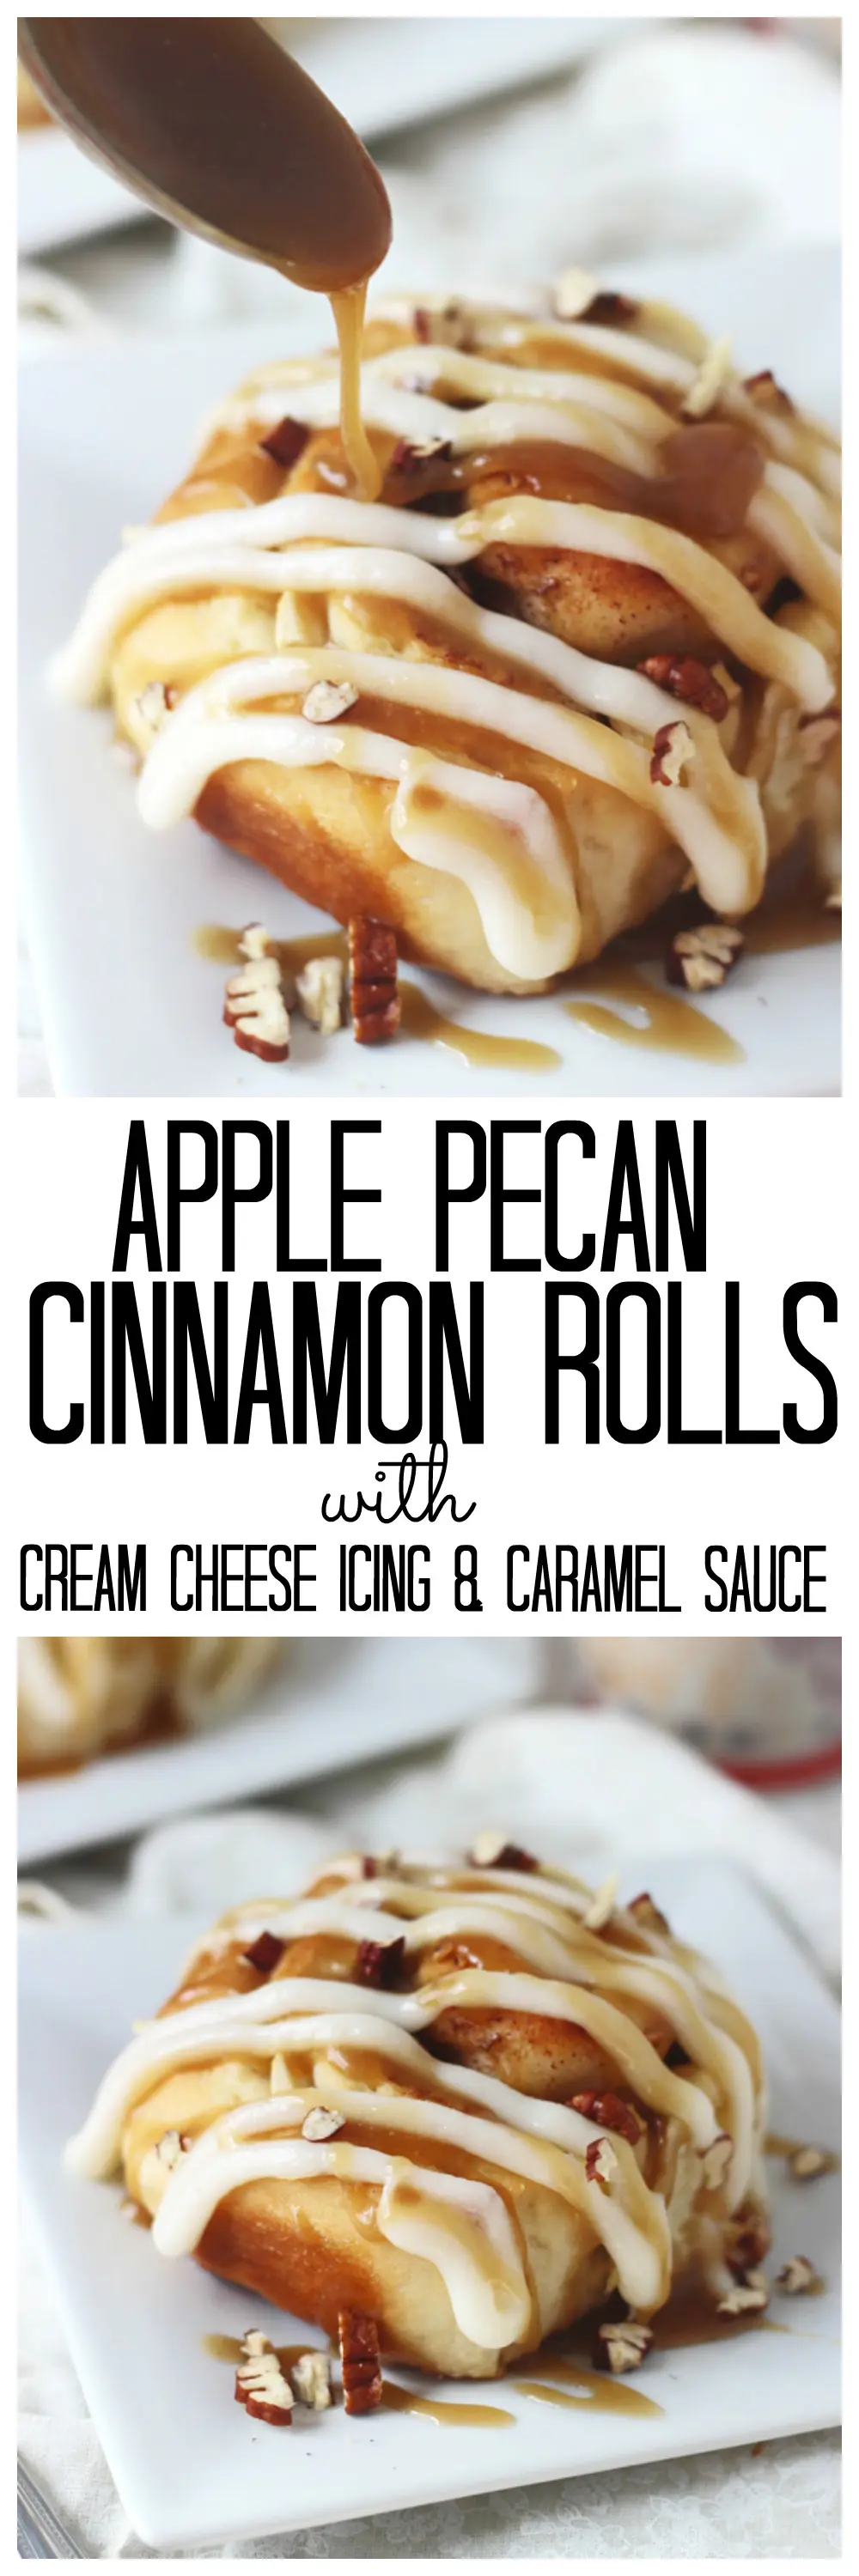 Apple Pecan Cinnamon Rolls with Cream Cheese Icing and Caramel Sauce